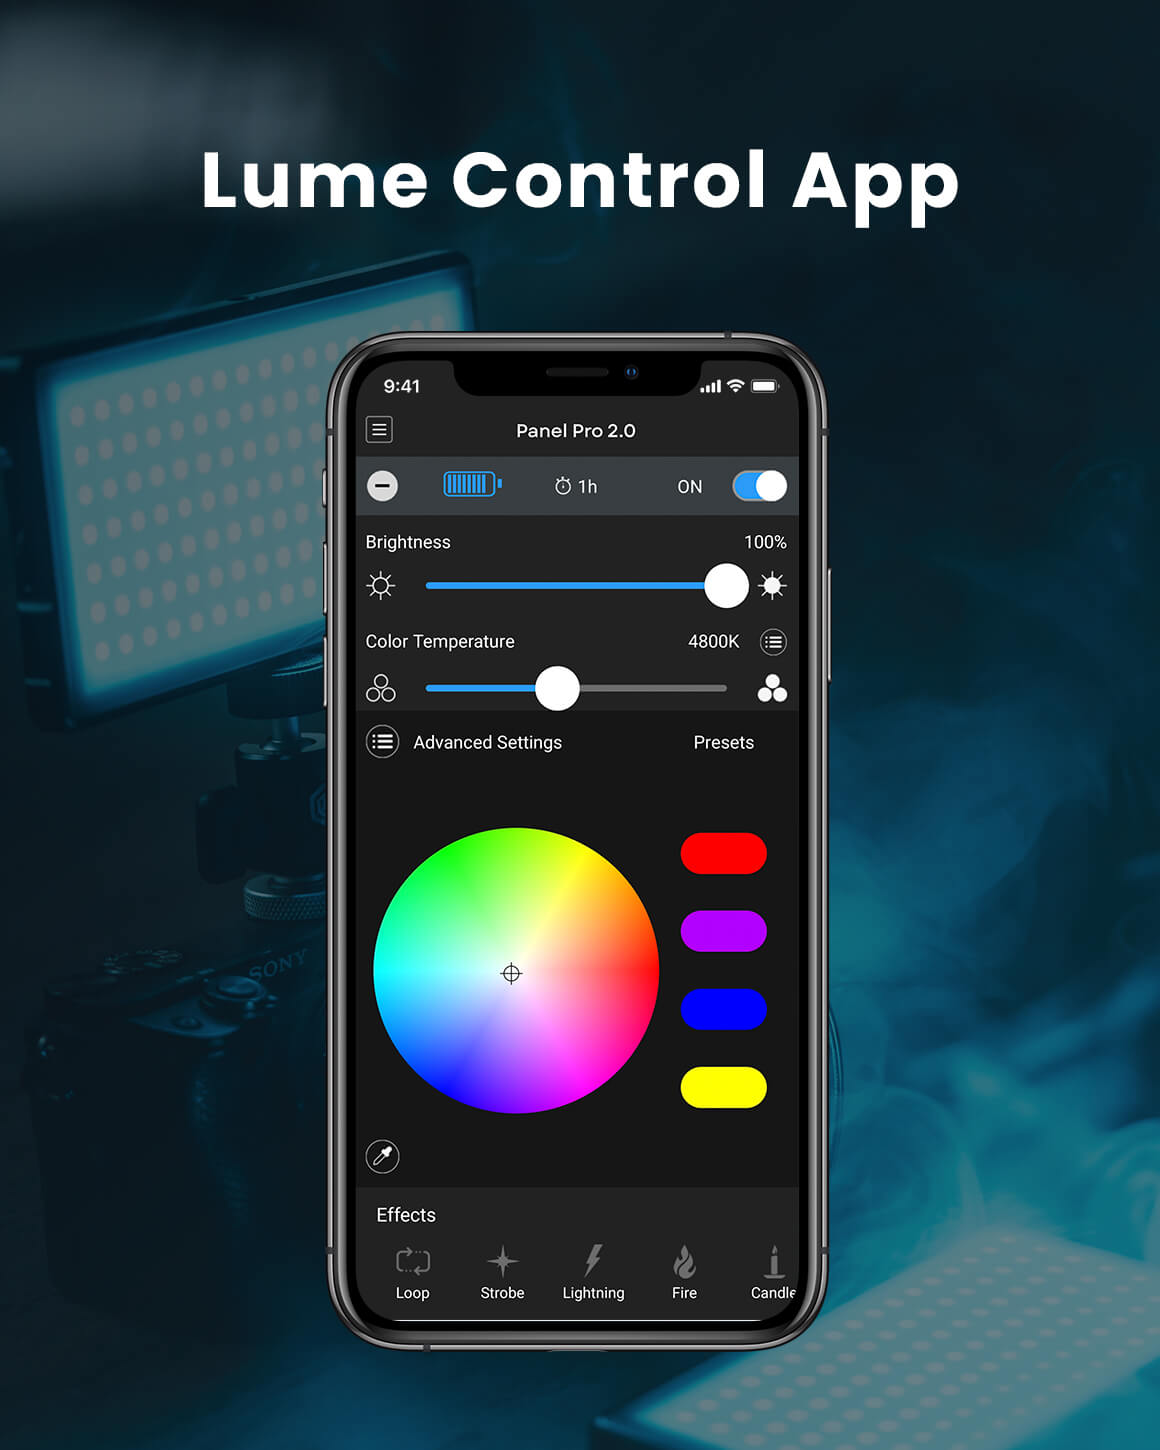 Close up view of the Lume Control App on a phone